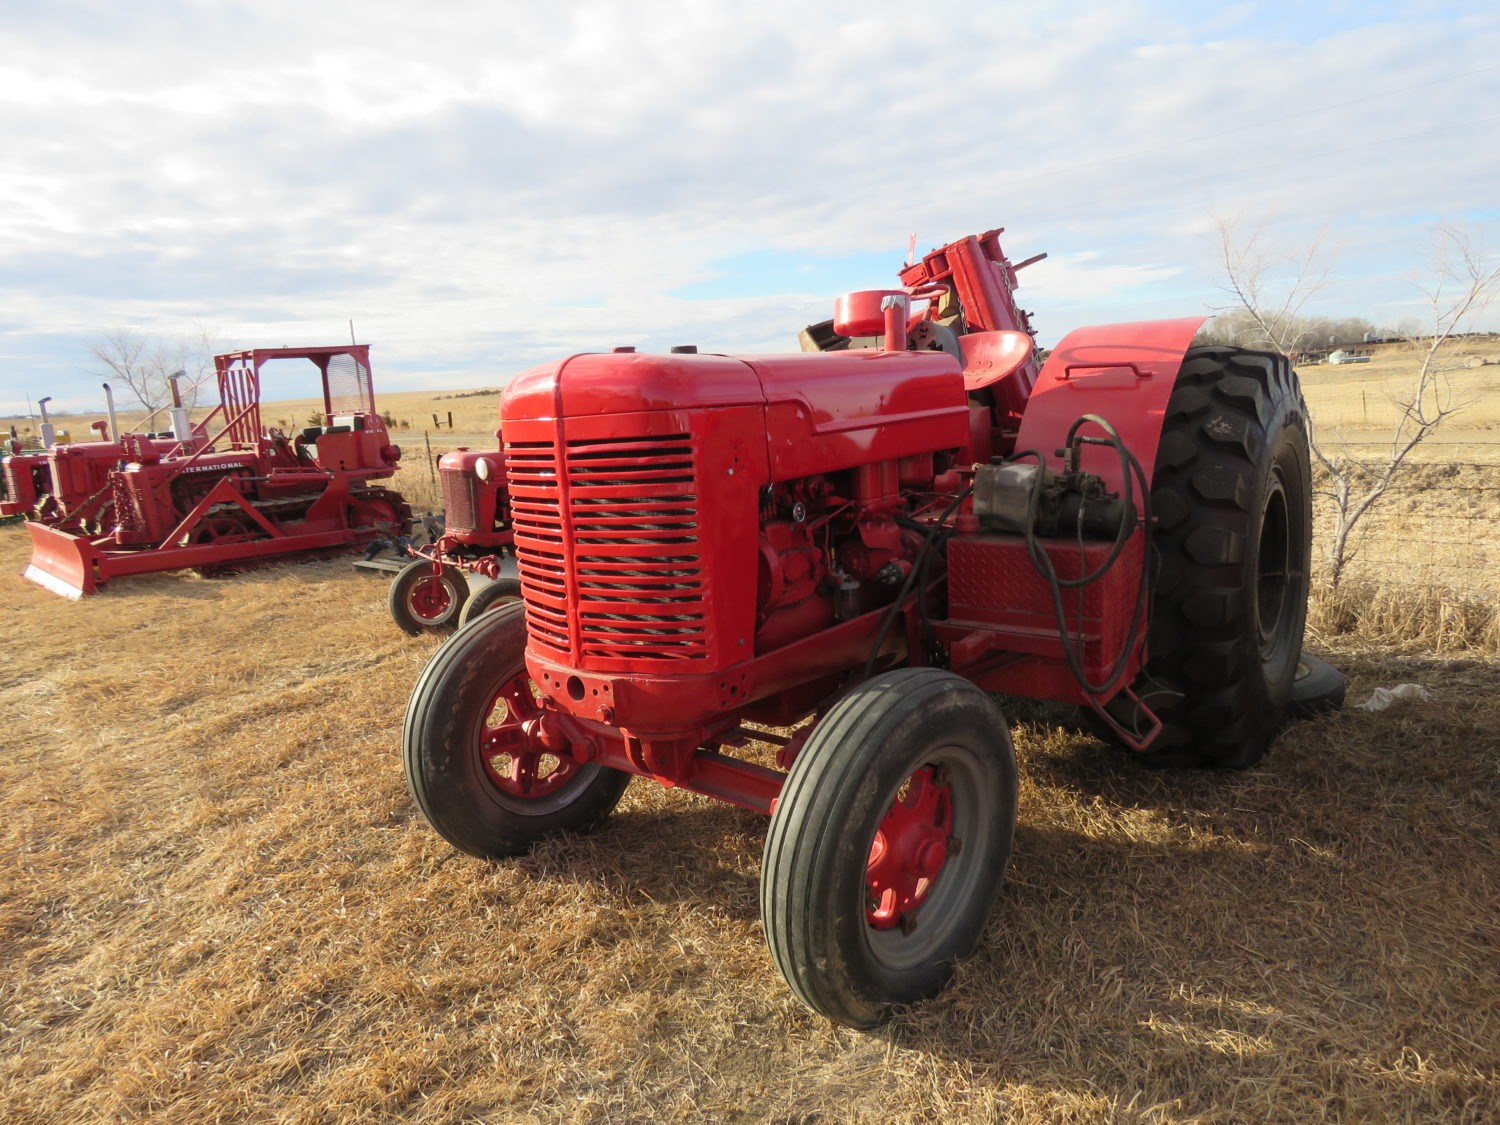 Classic Cars, Custom Motorcycles, Antique Tractors, Construction Equipment & More!  The Gary VanDerPol Collection - image 13